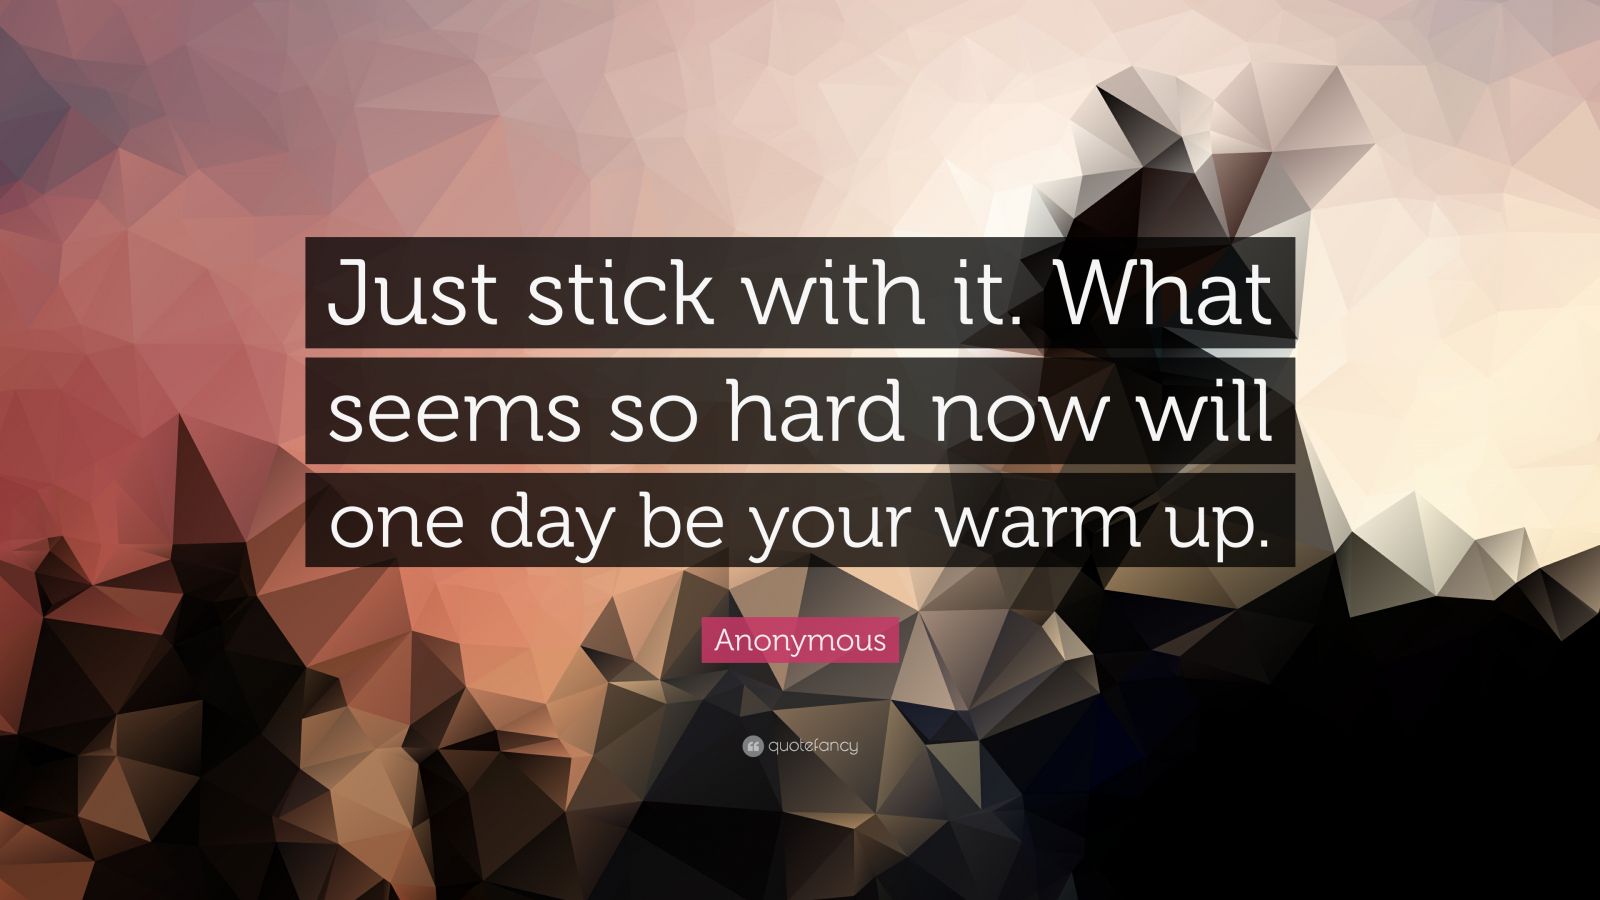 Anonymous Quote: “Just stick with it. What seems so hard now will one